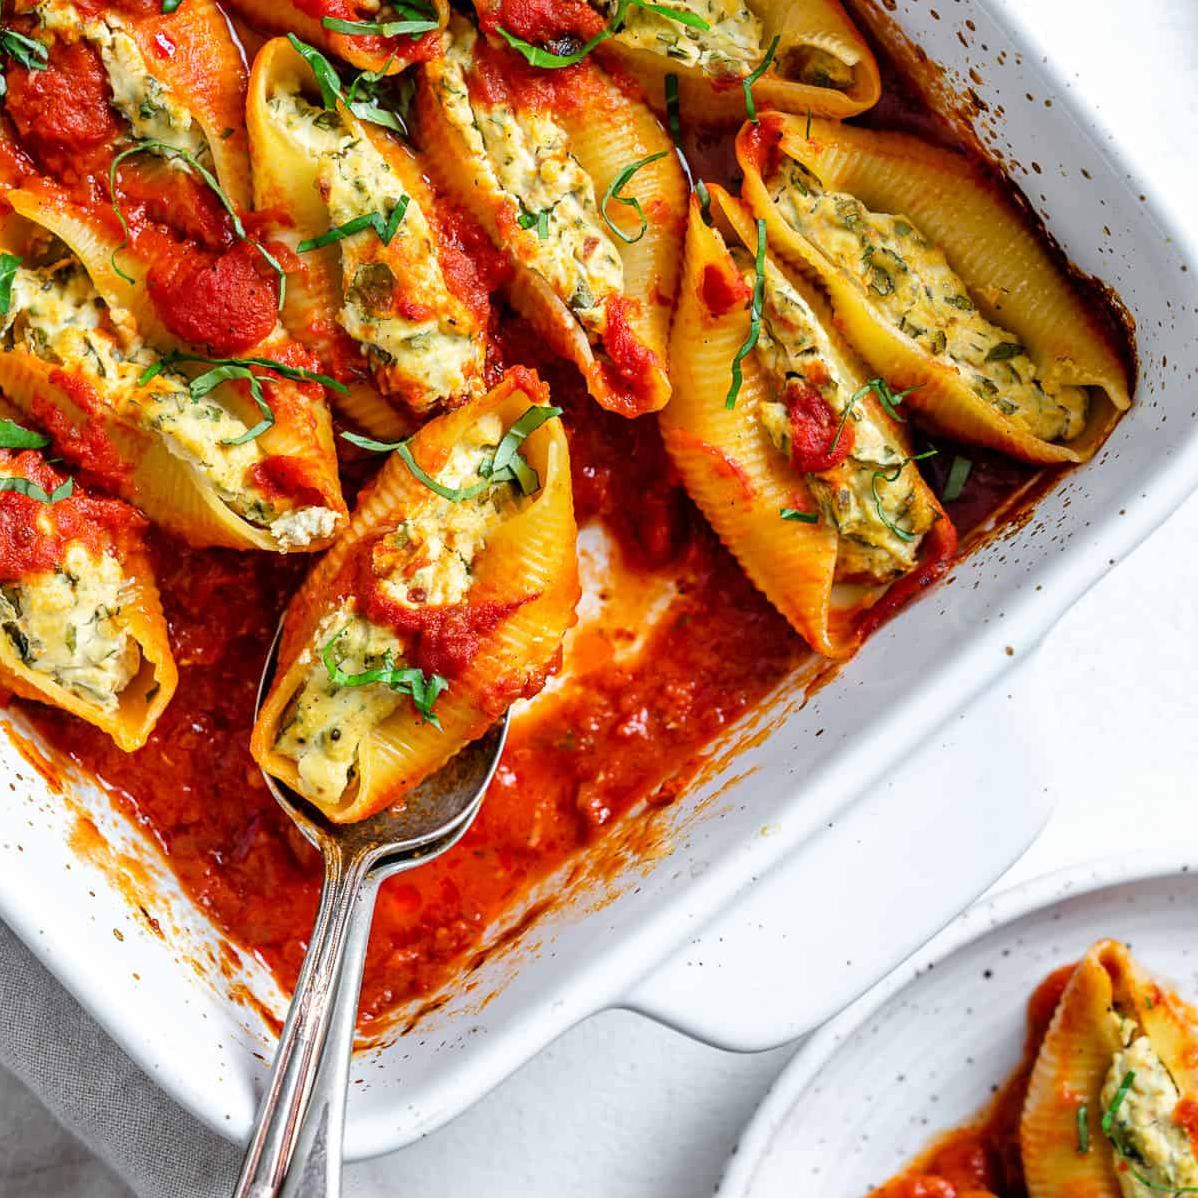  You'll love how easy it is to make these delicious and healthy stuffed shells.